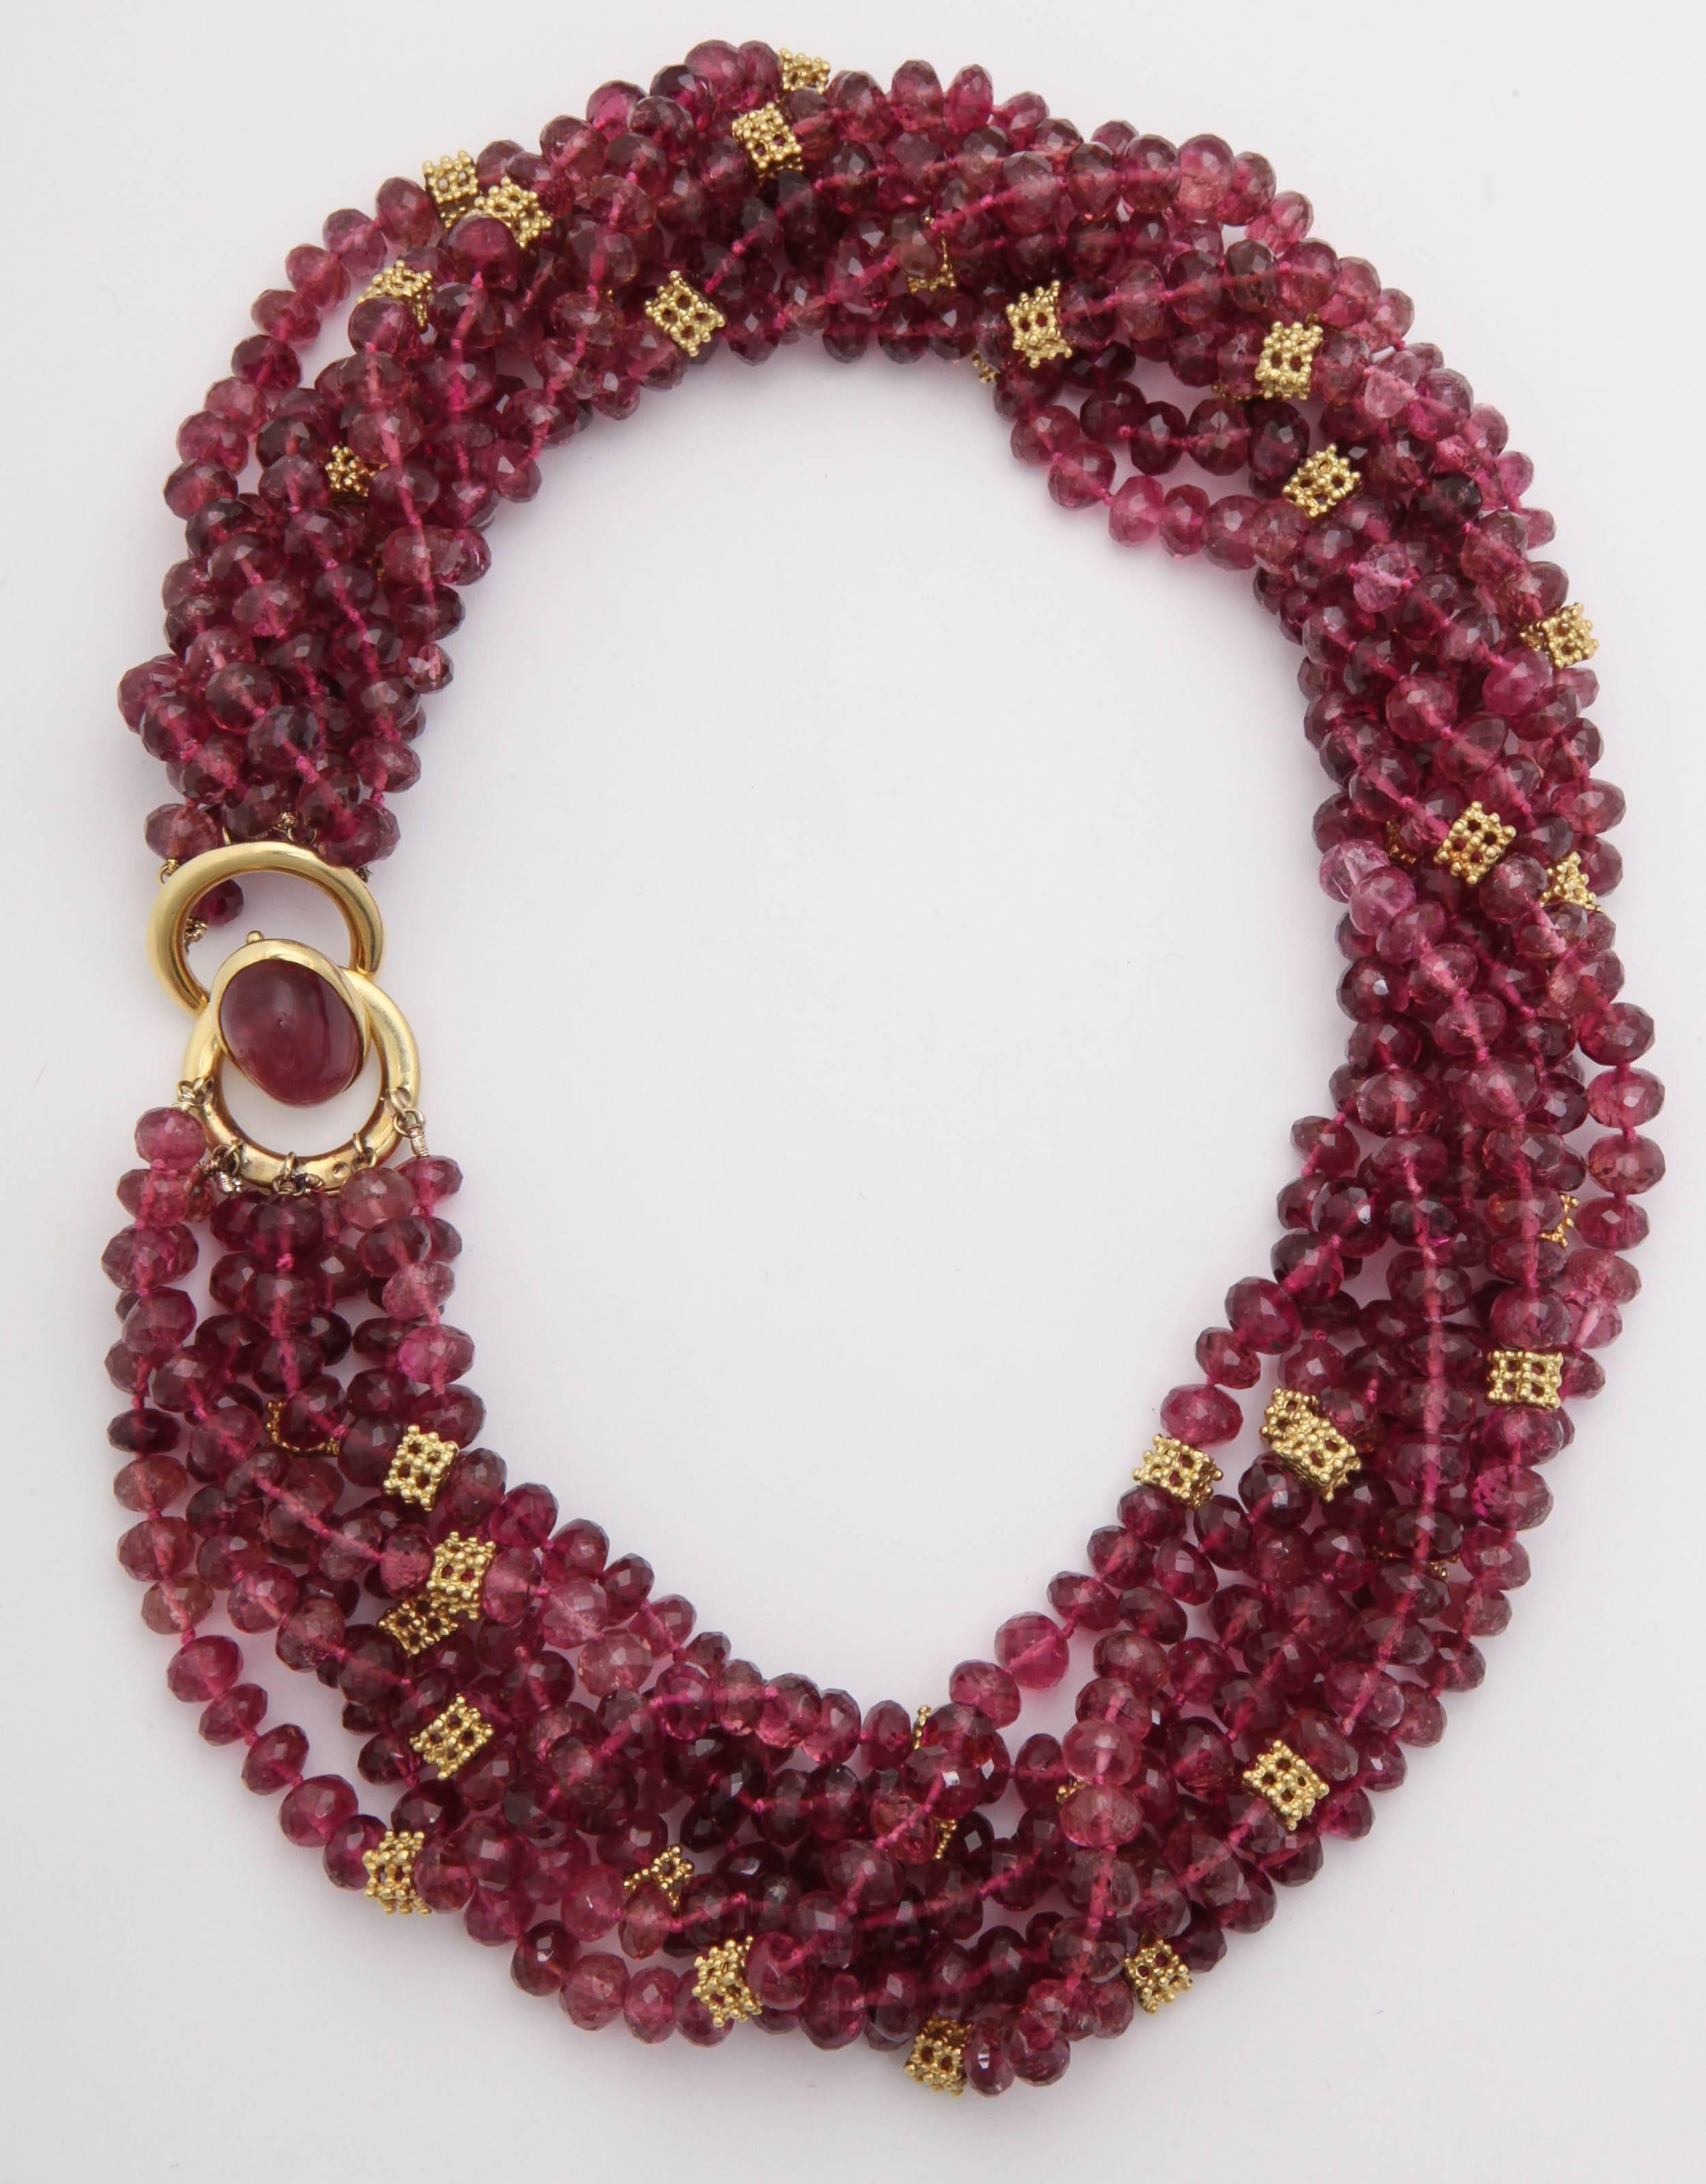 Signed Cartier Torsade necklace made up of seven strands of Faceted Pink Tourmalines with 18kt Yellow Gold pierced Spacers interspersed throughout. Signed & dated 1997 and numbered. Double Oval Gold Ring set with center Cabochon Tourmaline.  Can be